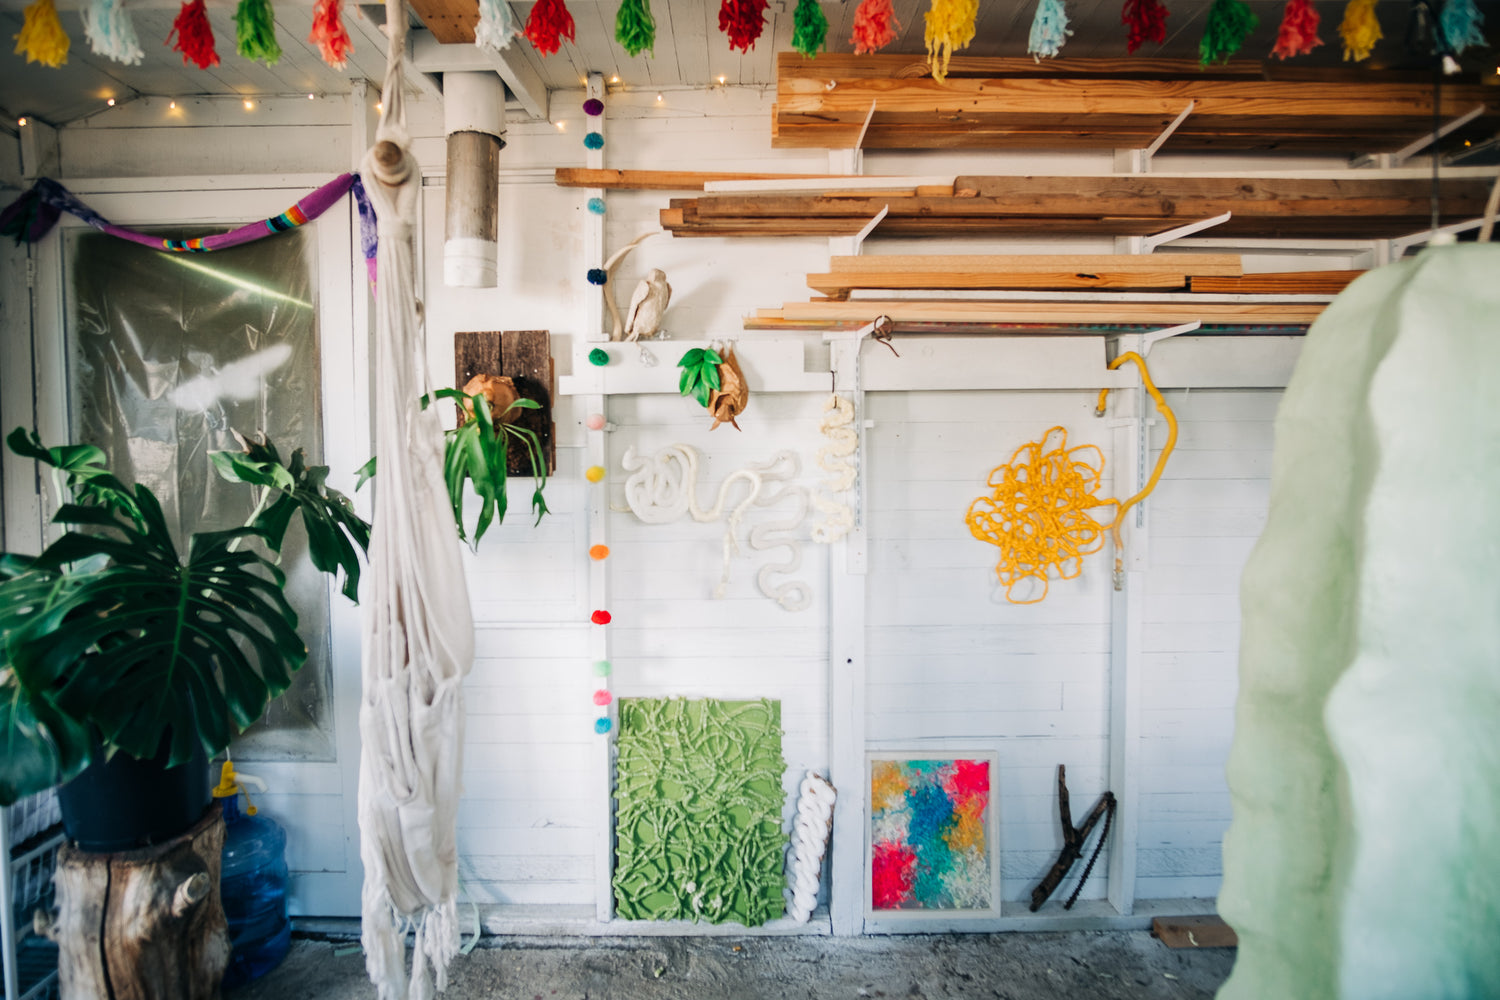 Image of studio wall, with decorative tassels hanging from the ceiling, wood piles, colorful art, plants, and a hammock 